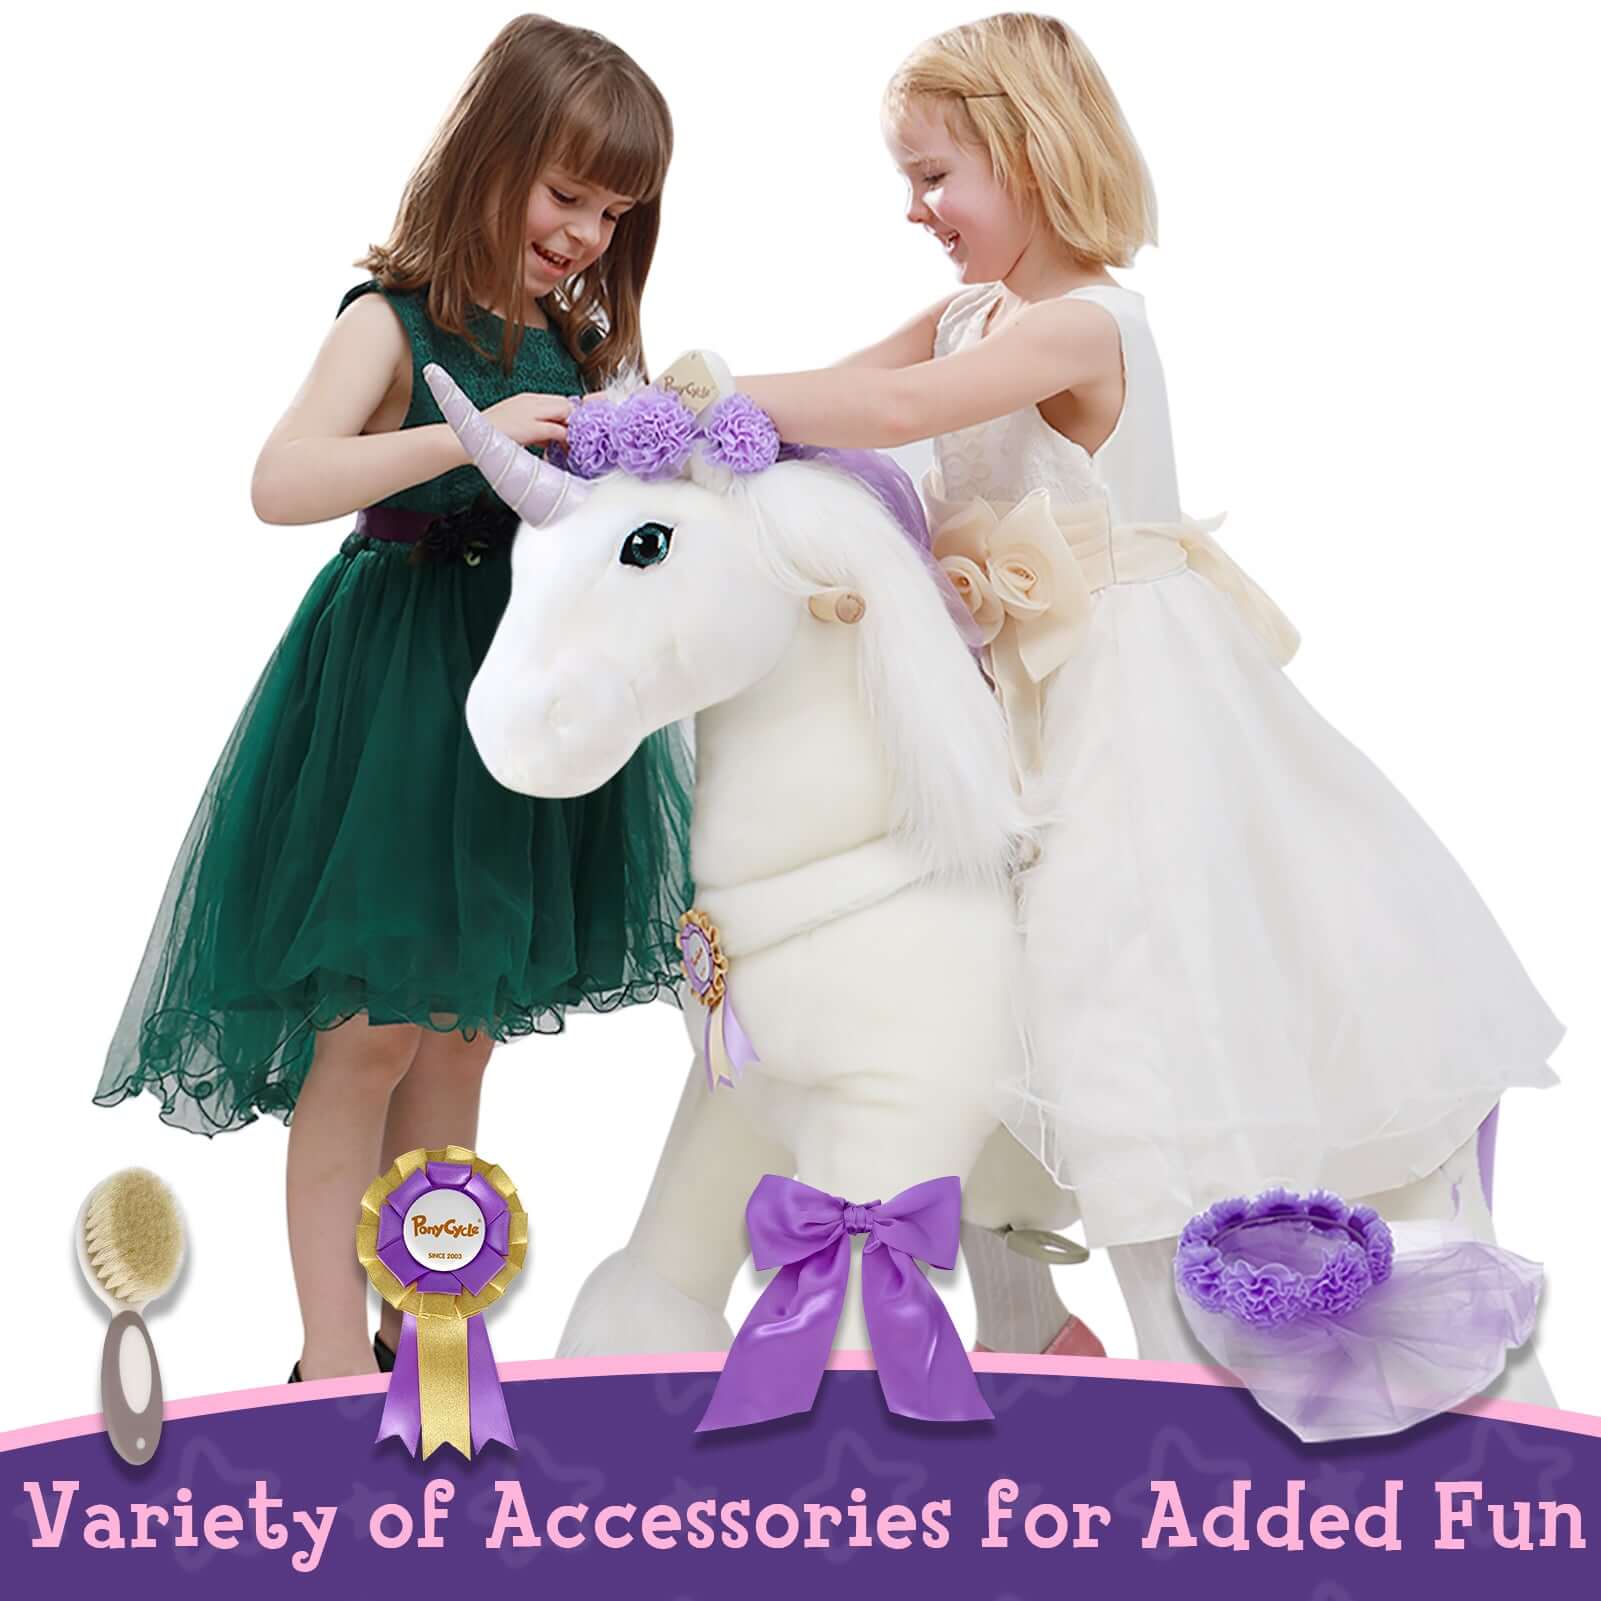 PonyCycle, Inc. PonyCycle K Purple Unicorn Ride-on Toy Age 4-8 (Accessories included)